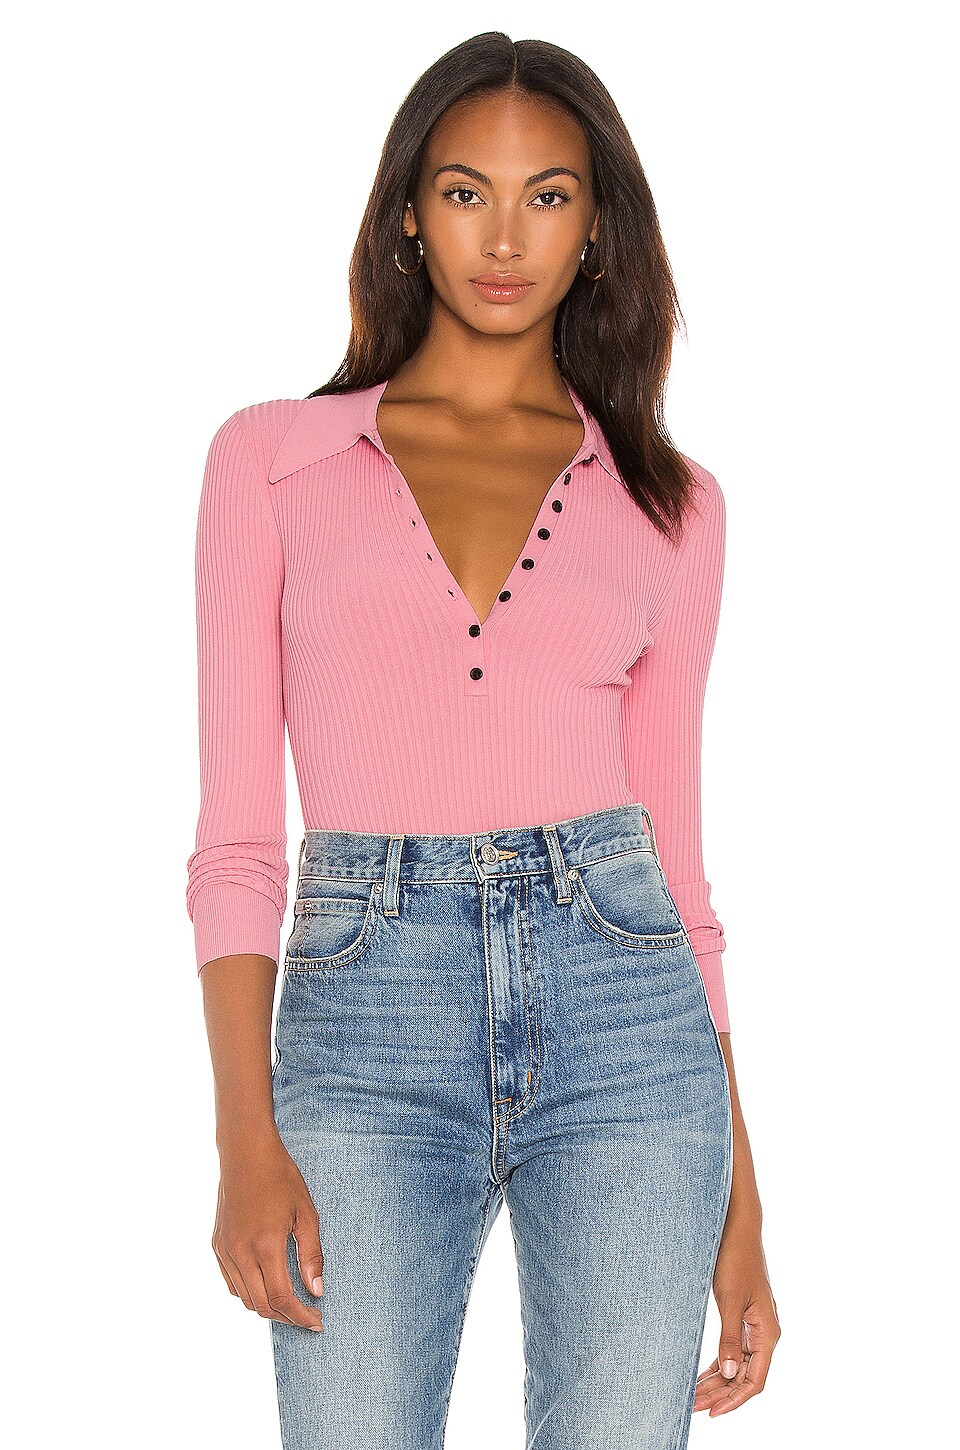 A.L.C. Lance Top in Coral Pink | REVOLVE